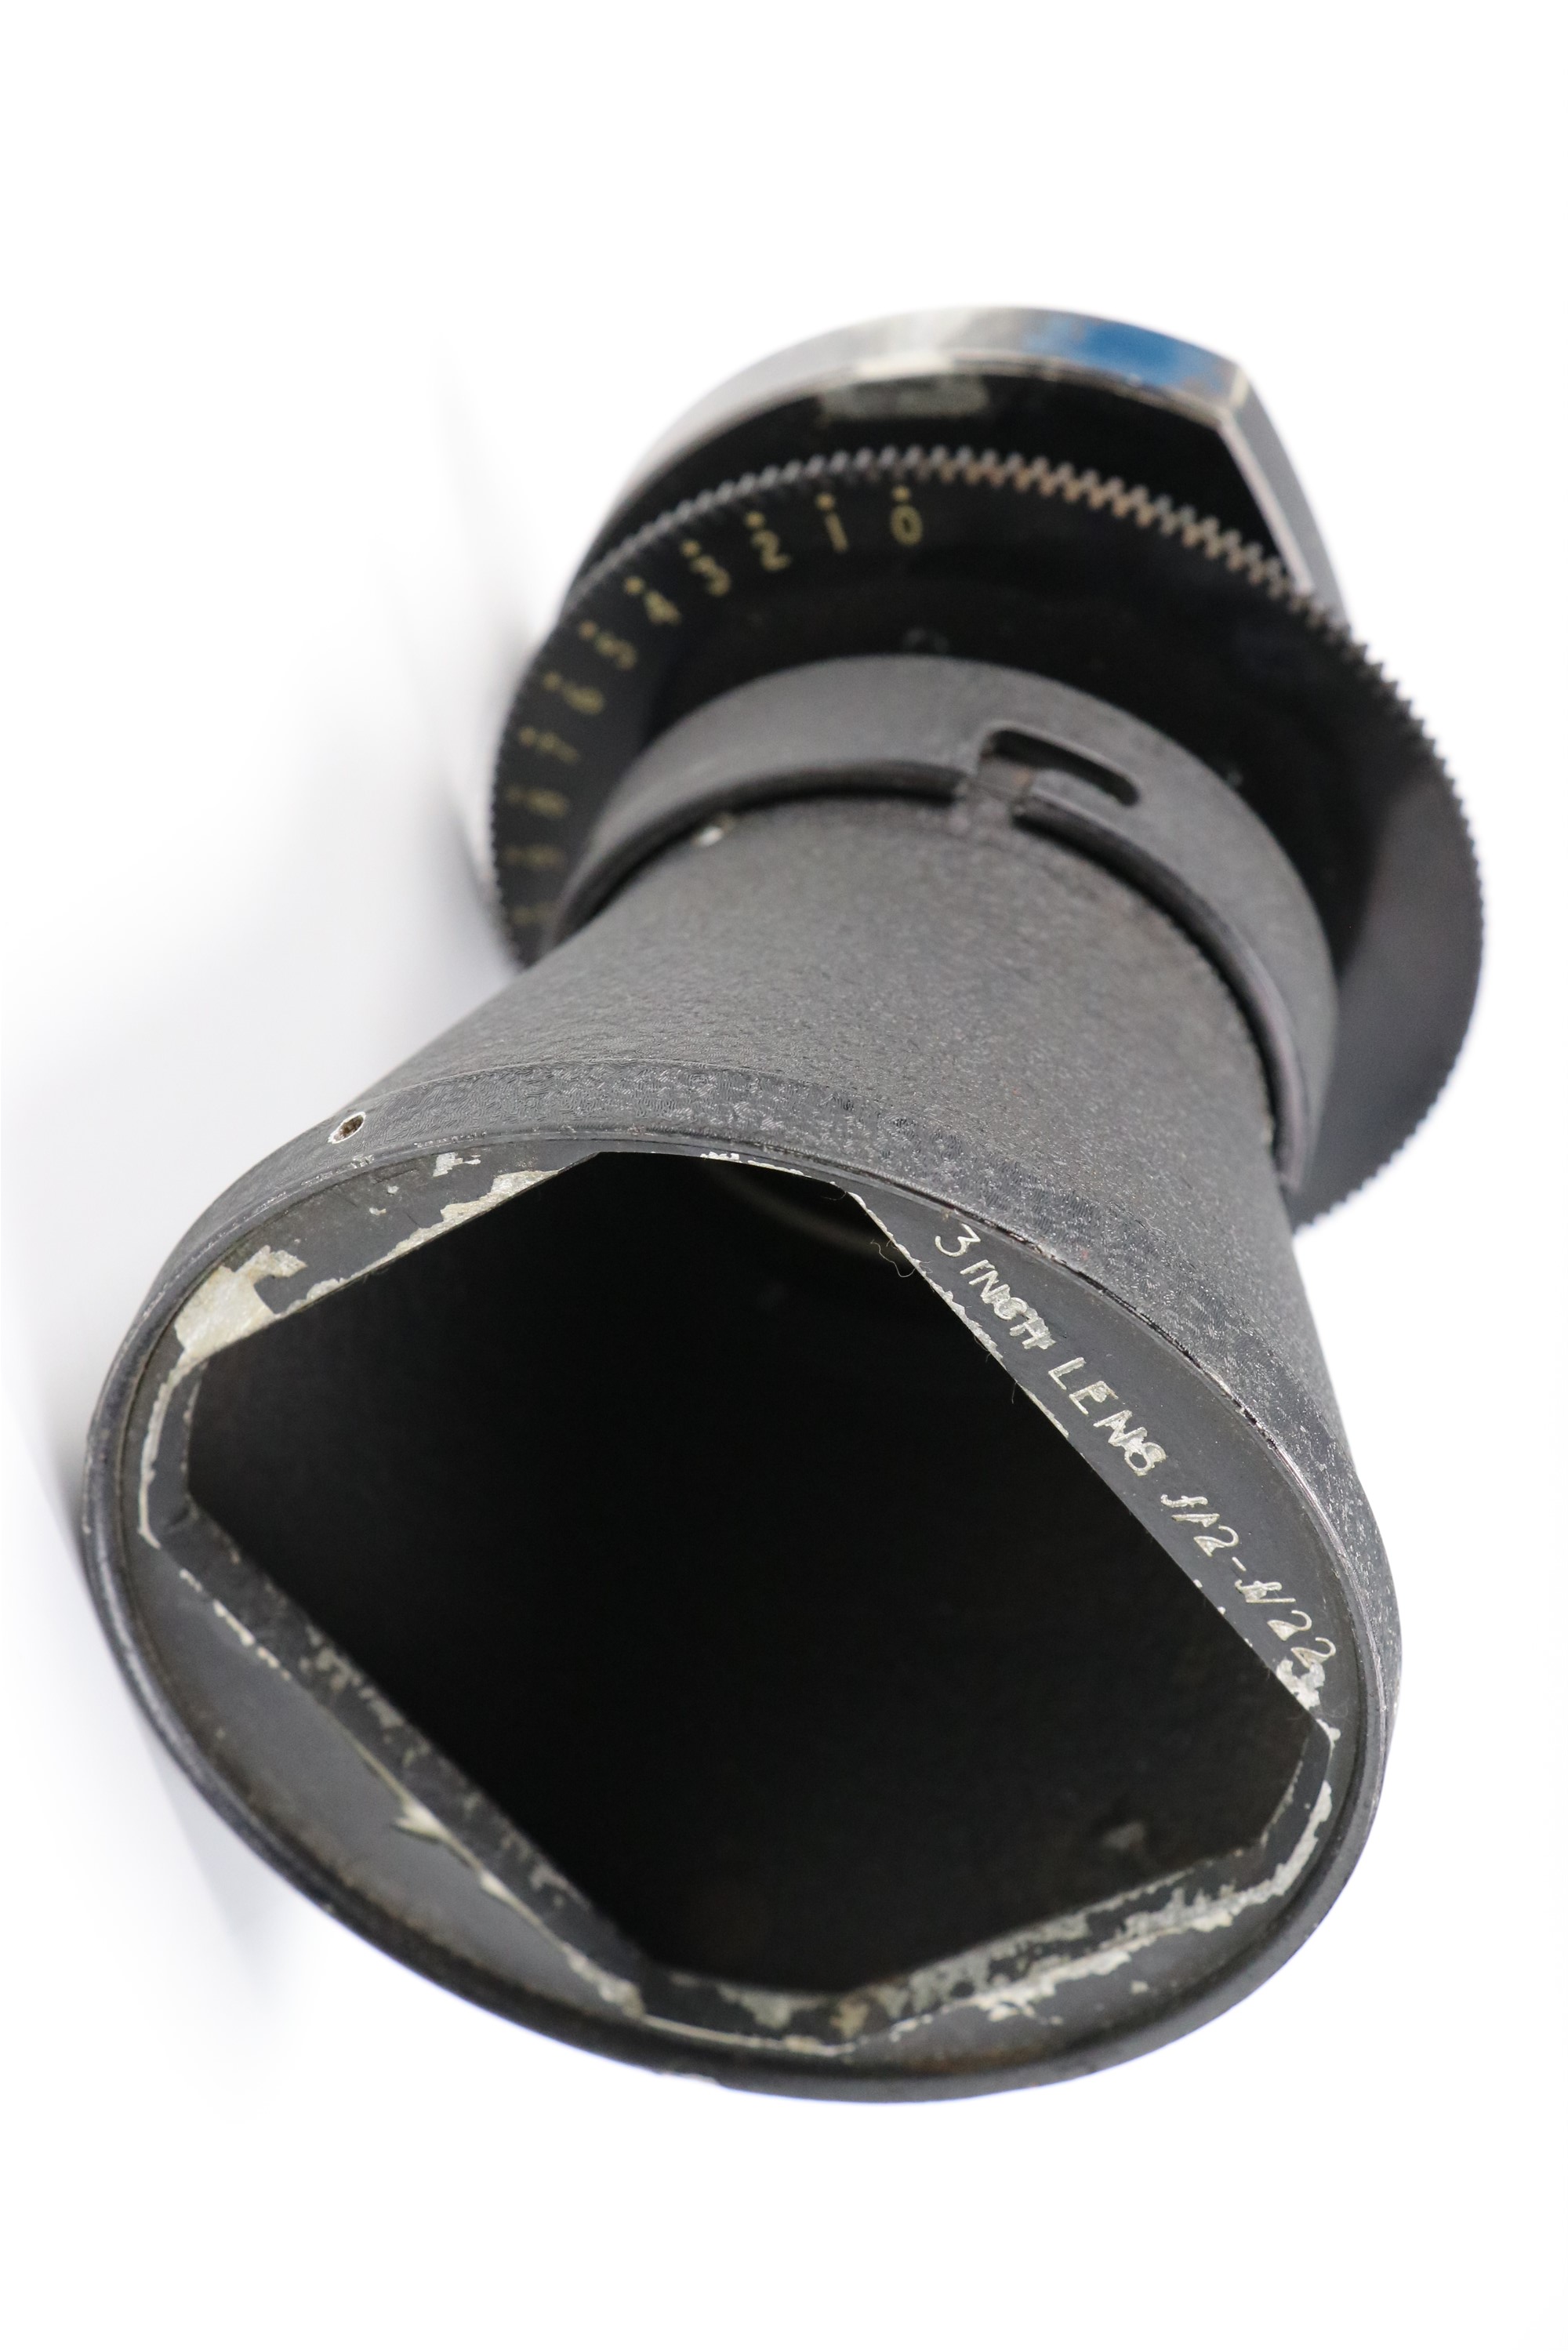 A cased set of Taylor and Hobson camera lenses, comprising an Ortal 2 inch 50 mm f/2 T2.3 TV Lens, - Image 18 of 39